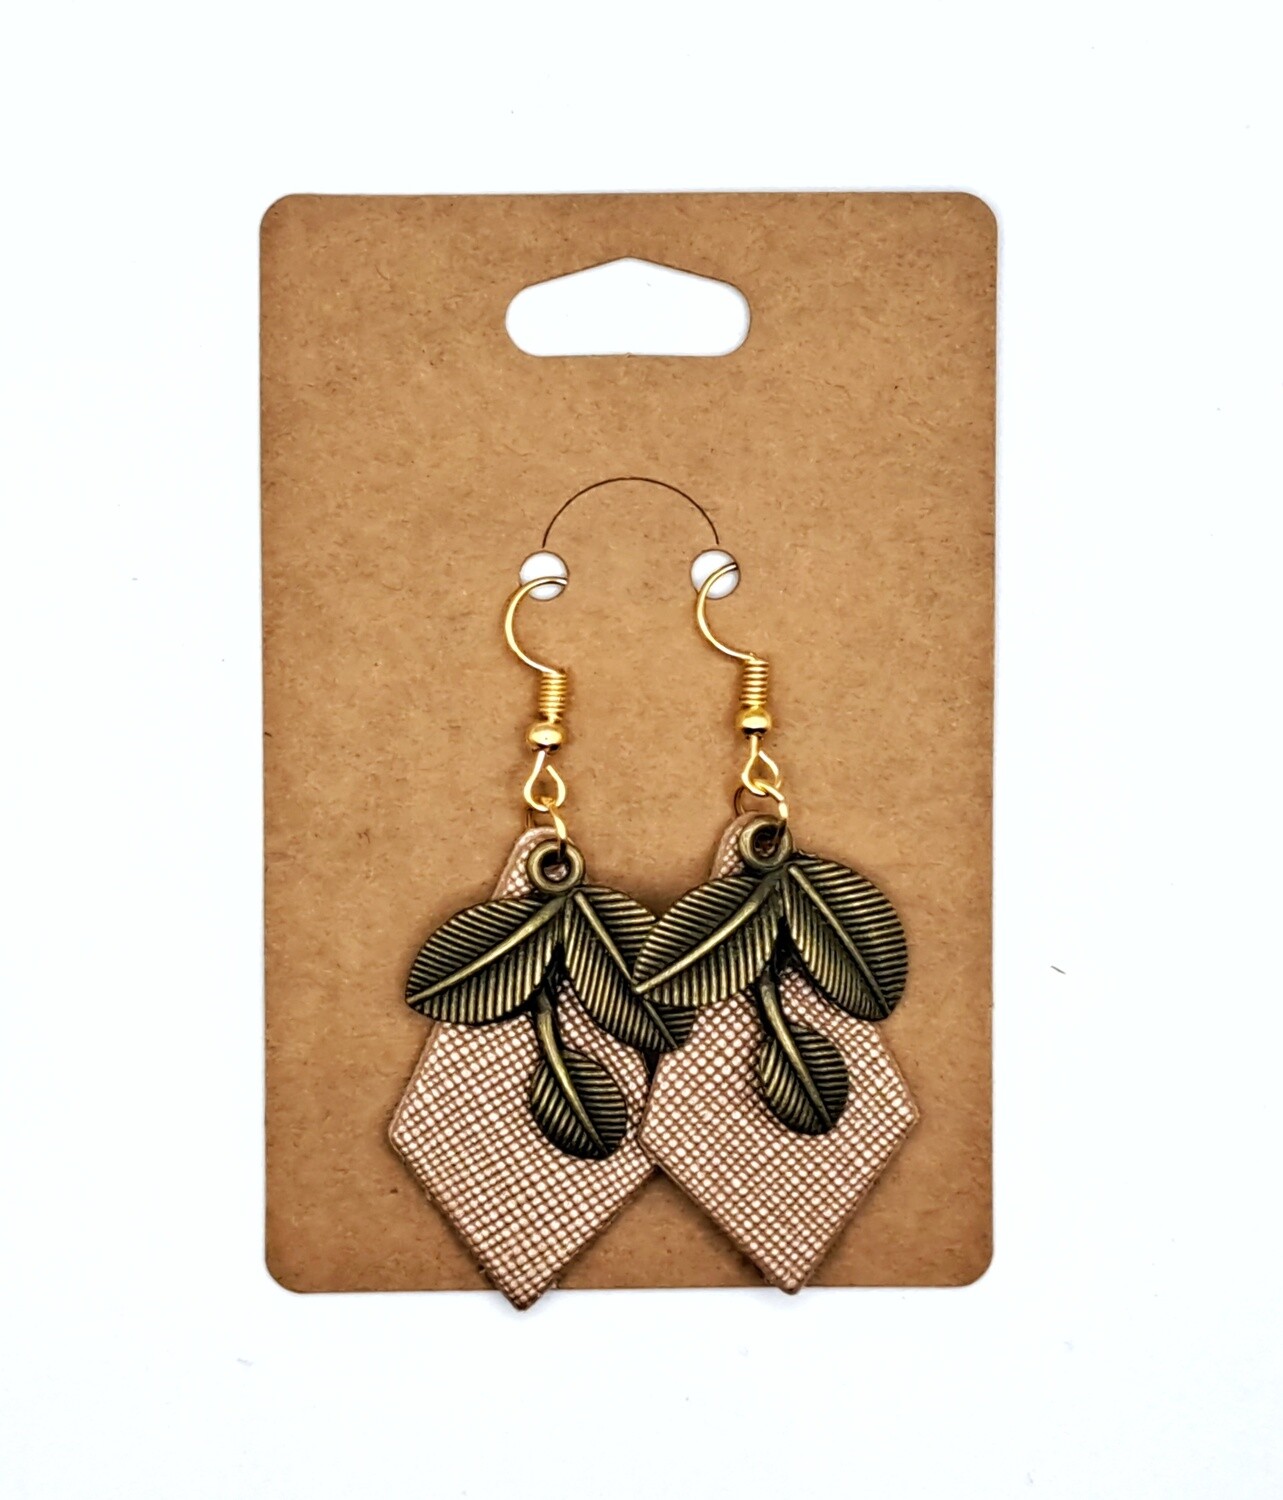 Handmade Diamond Shaped Faux Leather with Antique Bronze Leaves Charms Earrings